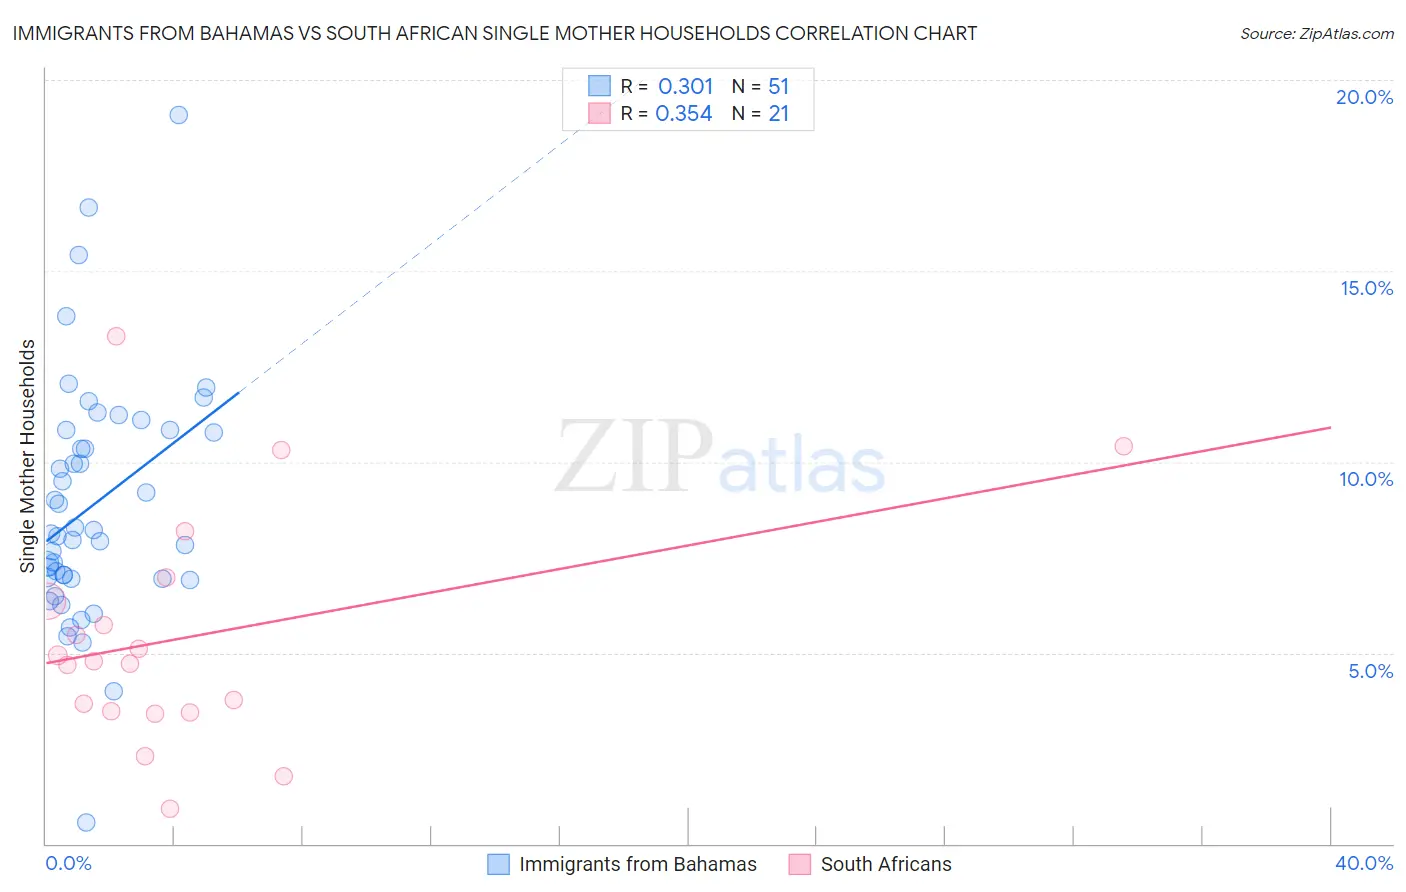 Immigrants from Bahamas vs South African Single Mother Households